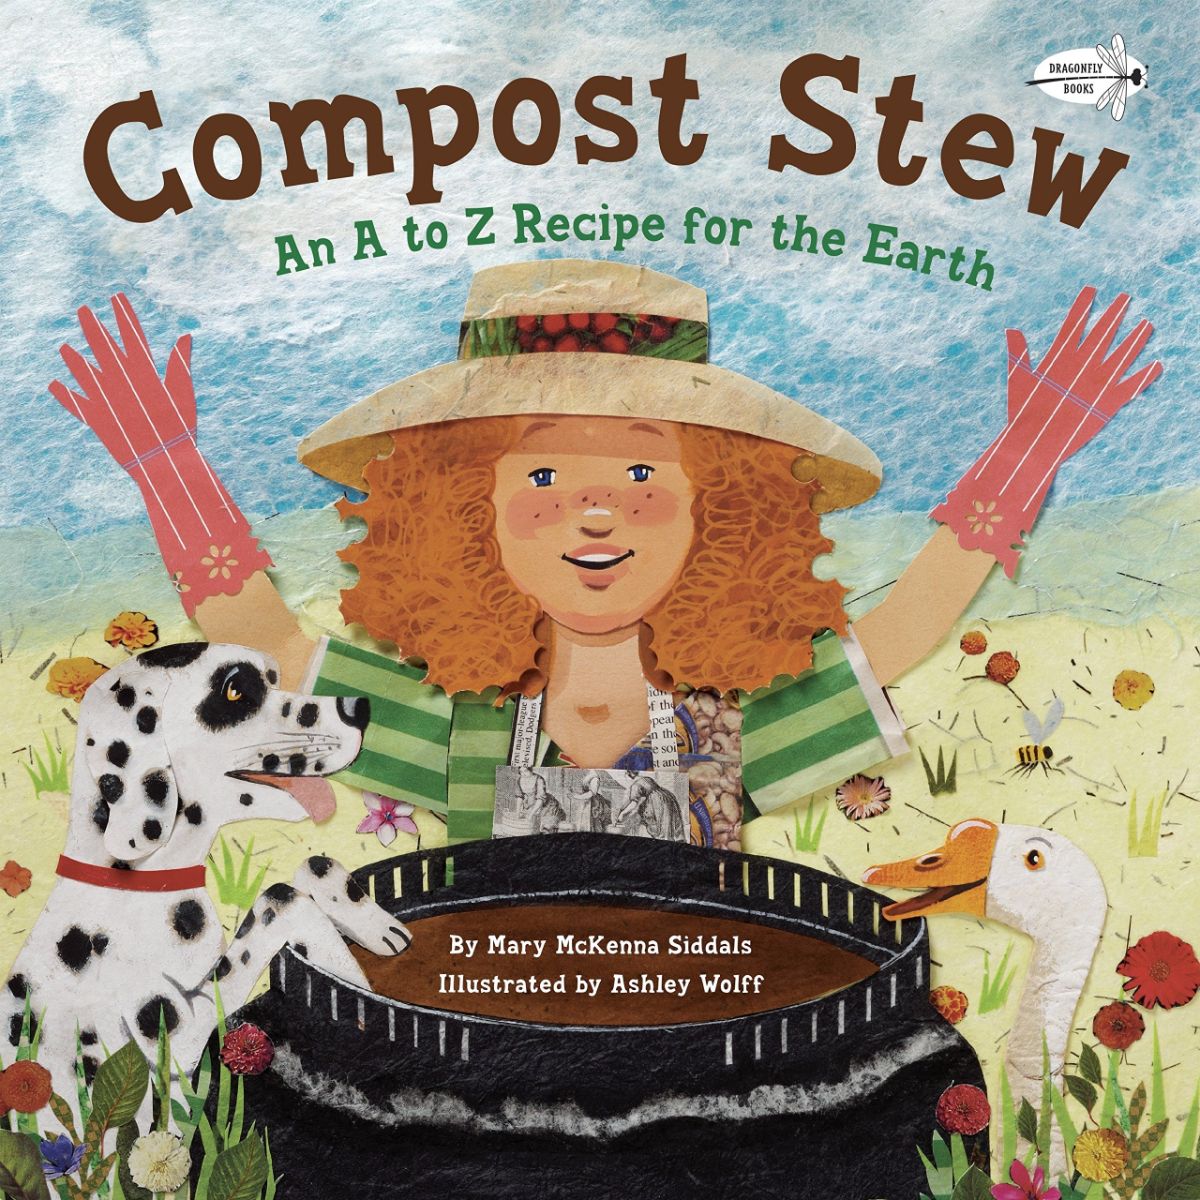 Picture of the cover of the book Compost Stew by Mary McKenna Siddals